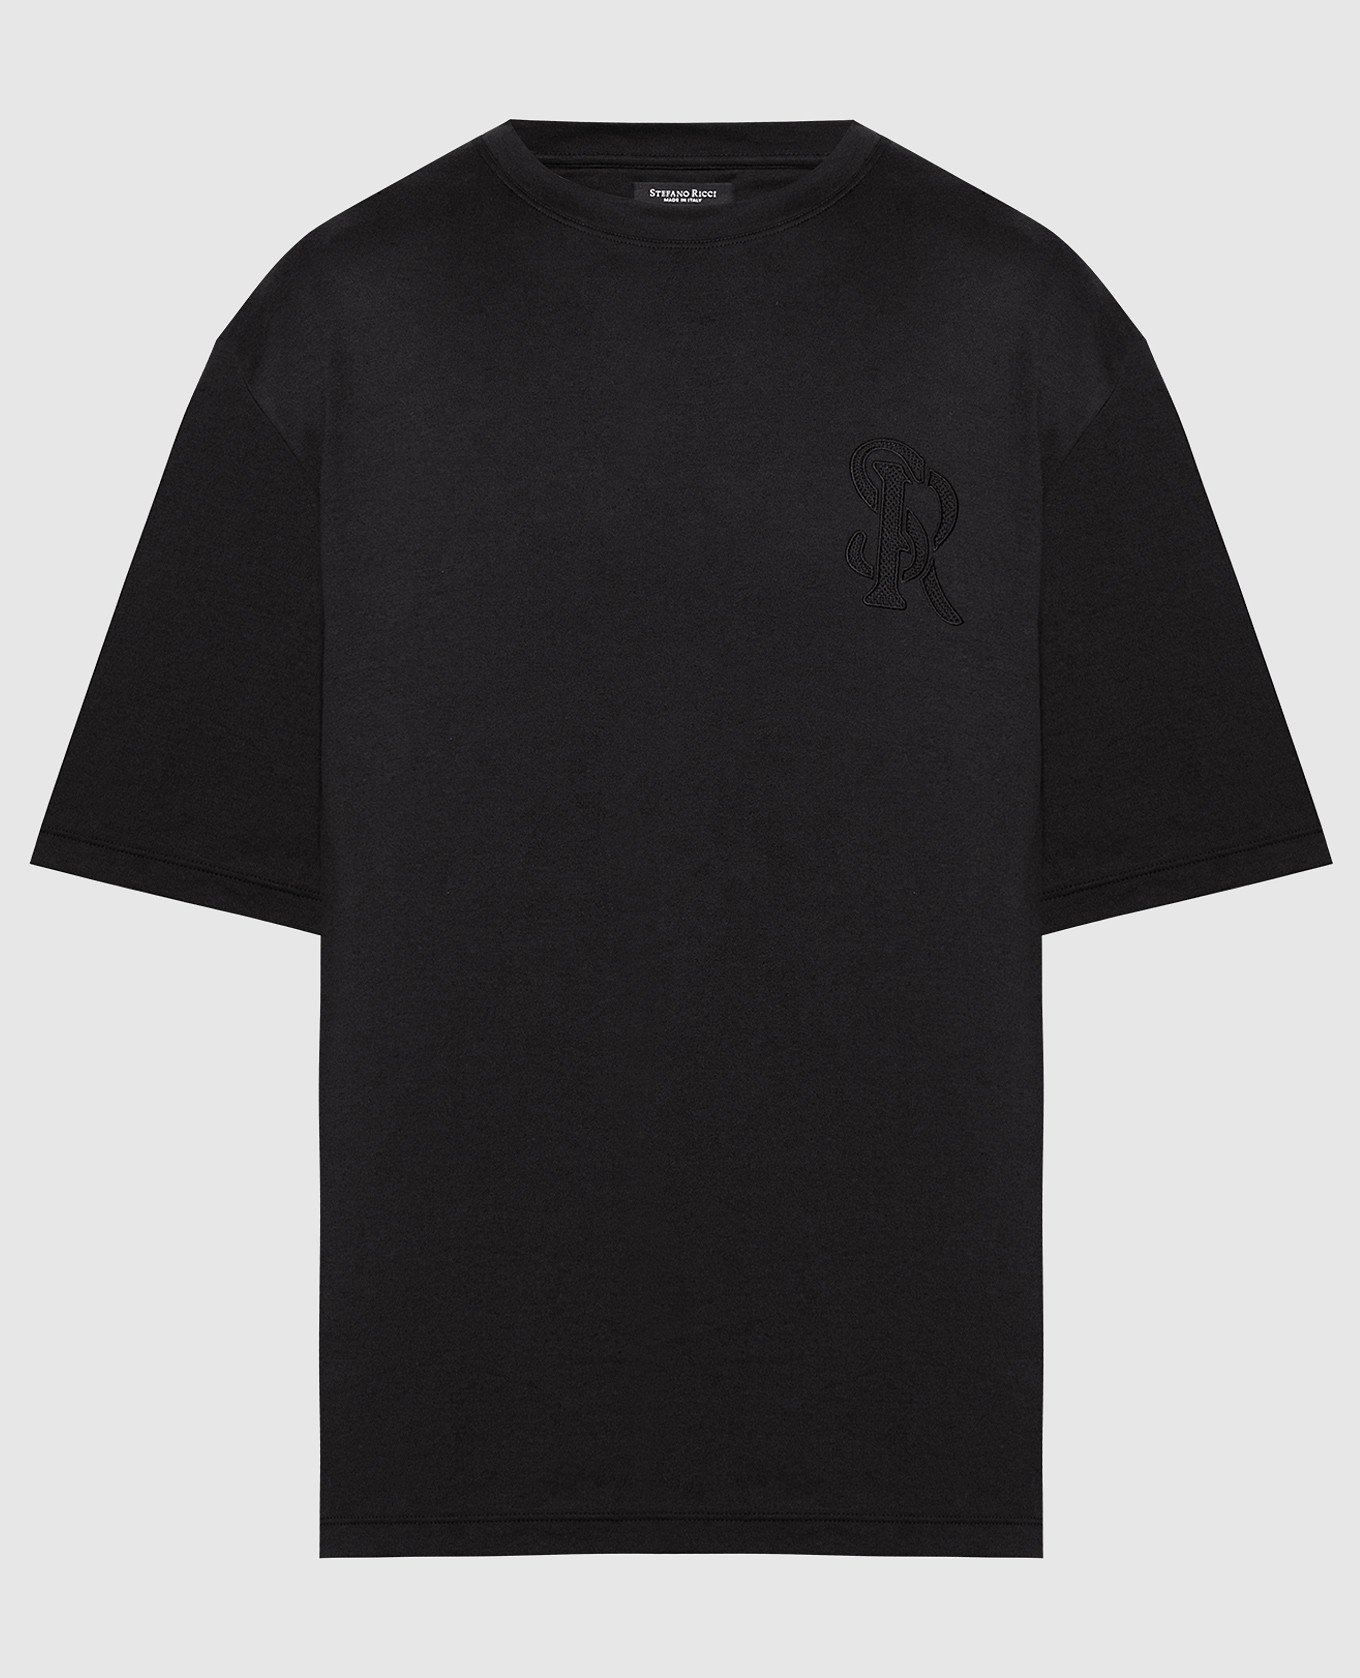 Black t-shirt with monogram logo embroidery